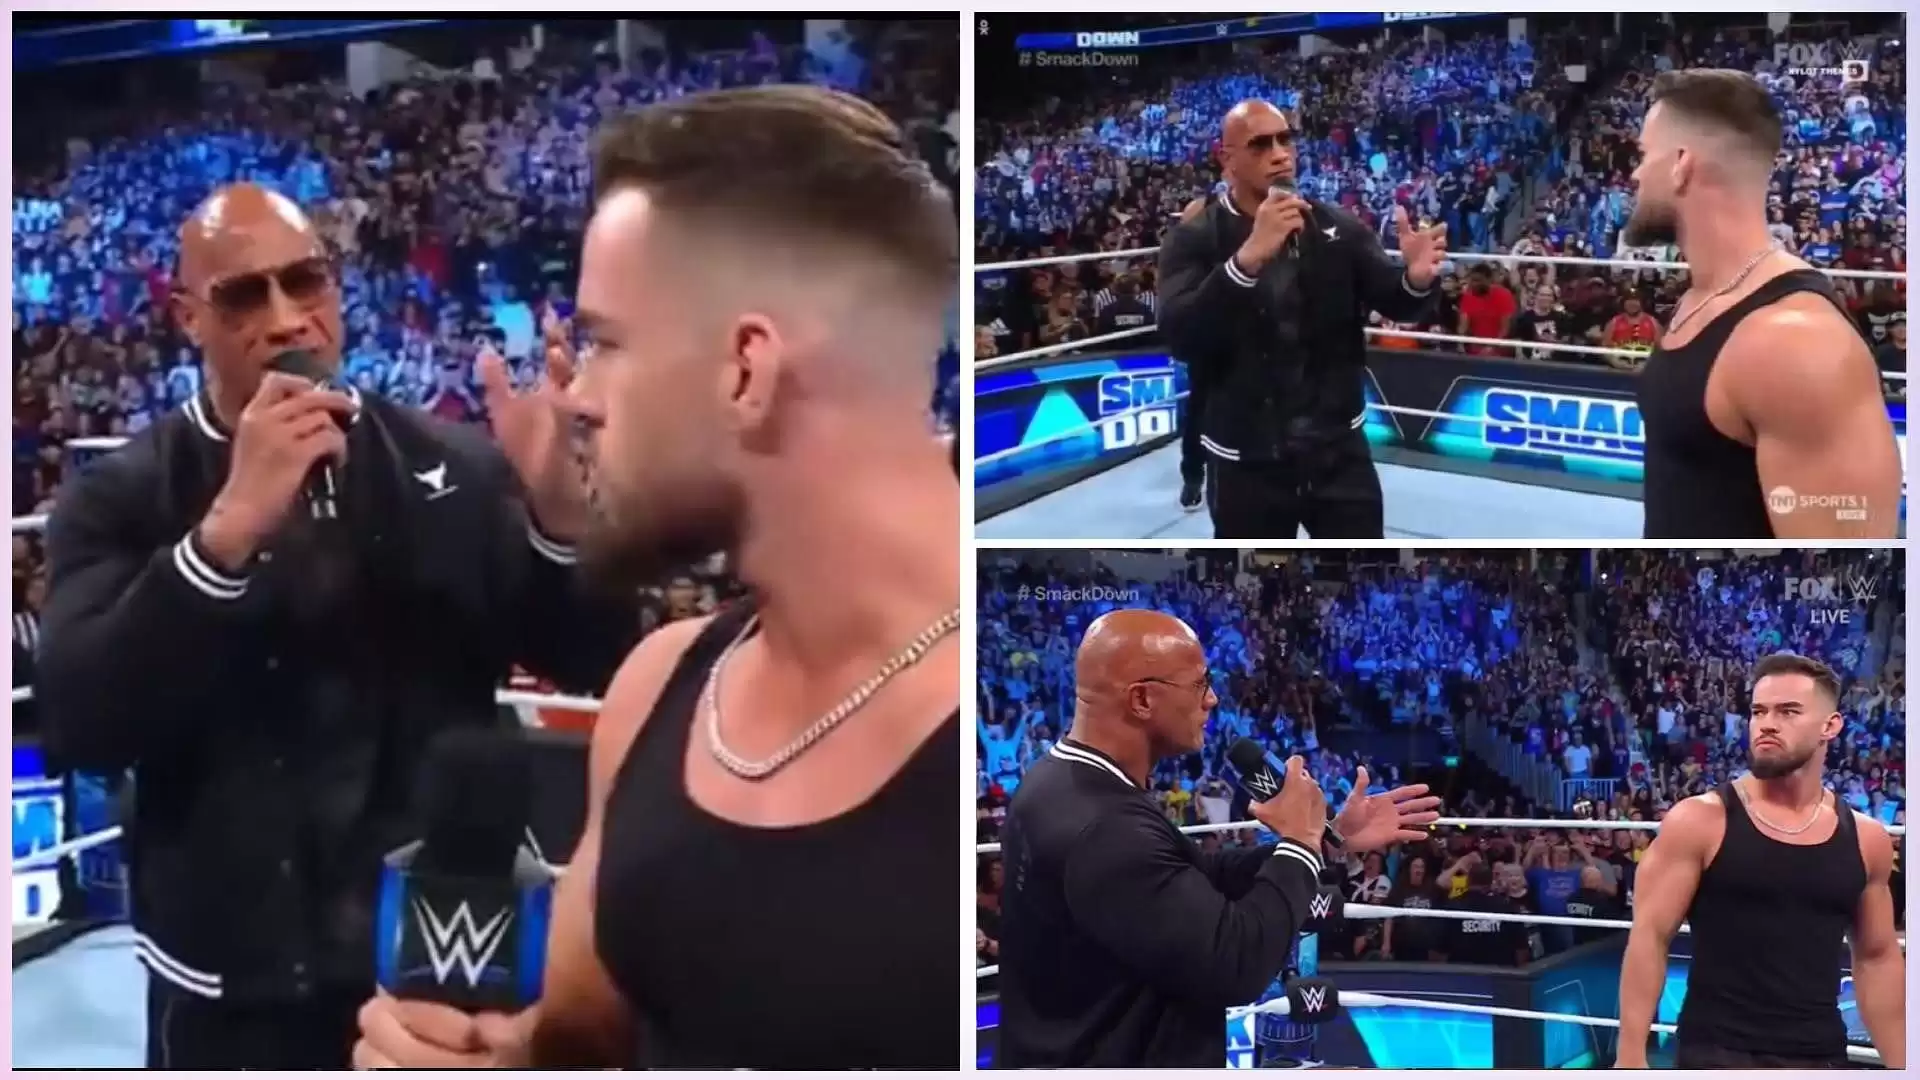 5-star confrontation: The Rock's missed WWE SmackDown opportunity with Austin Theory